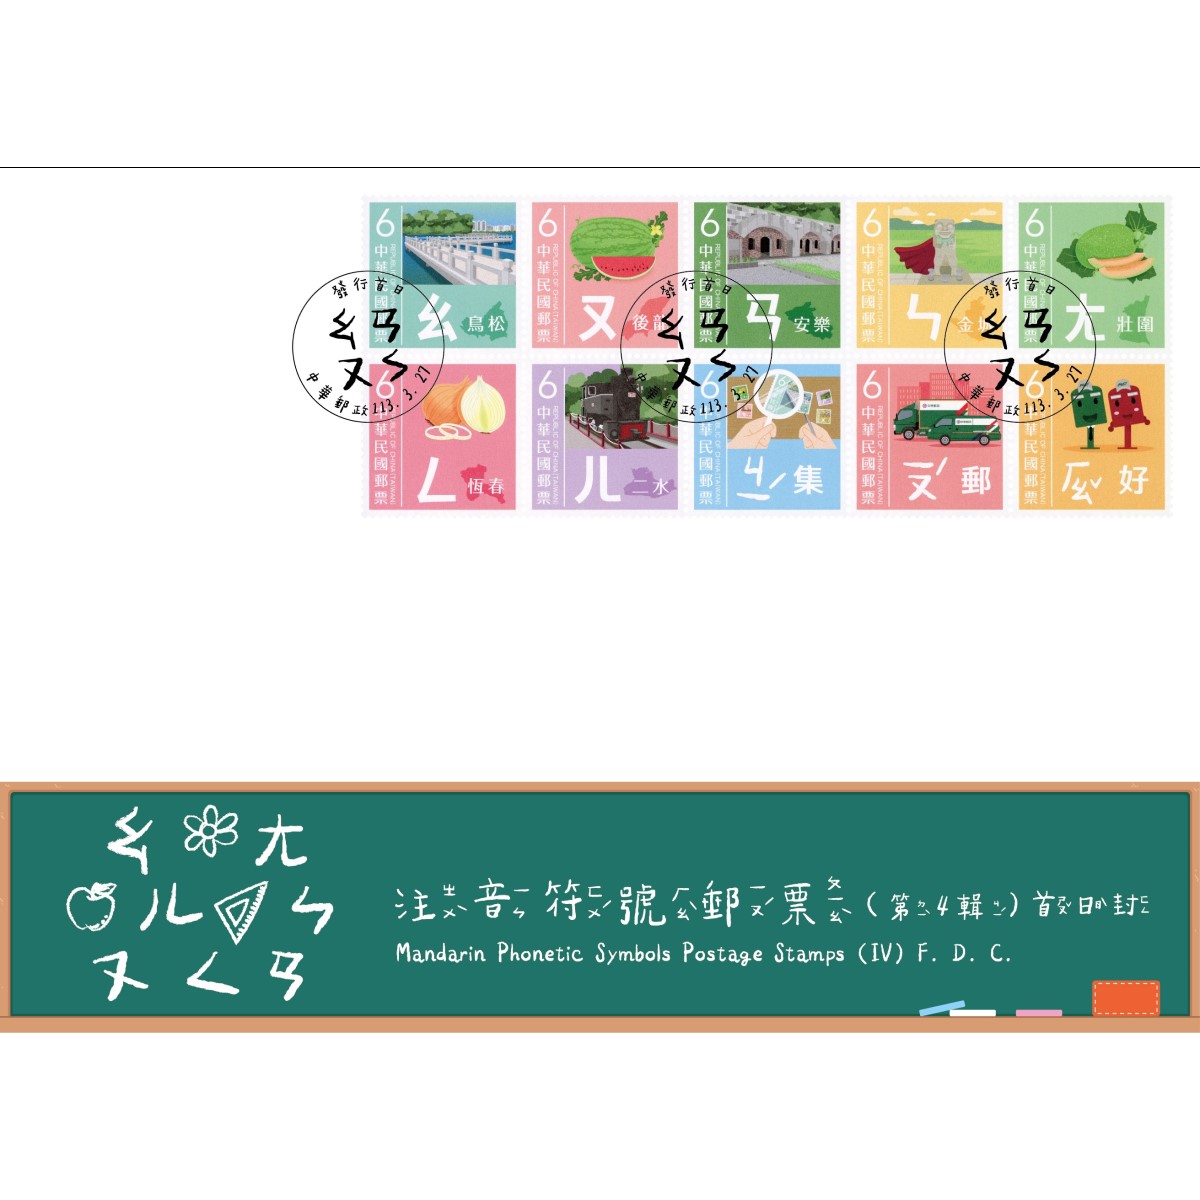 Mandarin Phonetic Symbols Postage Stamps (IV) Pre-cancelled FDC affixed with a complete set of stamps